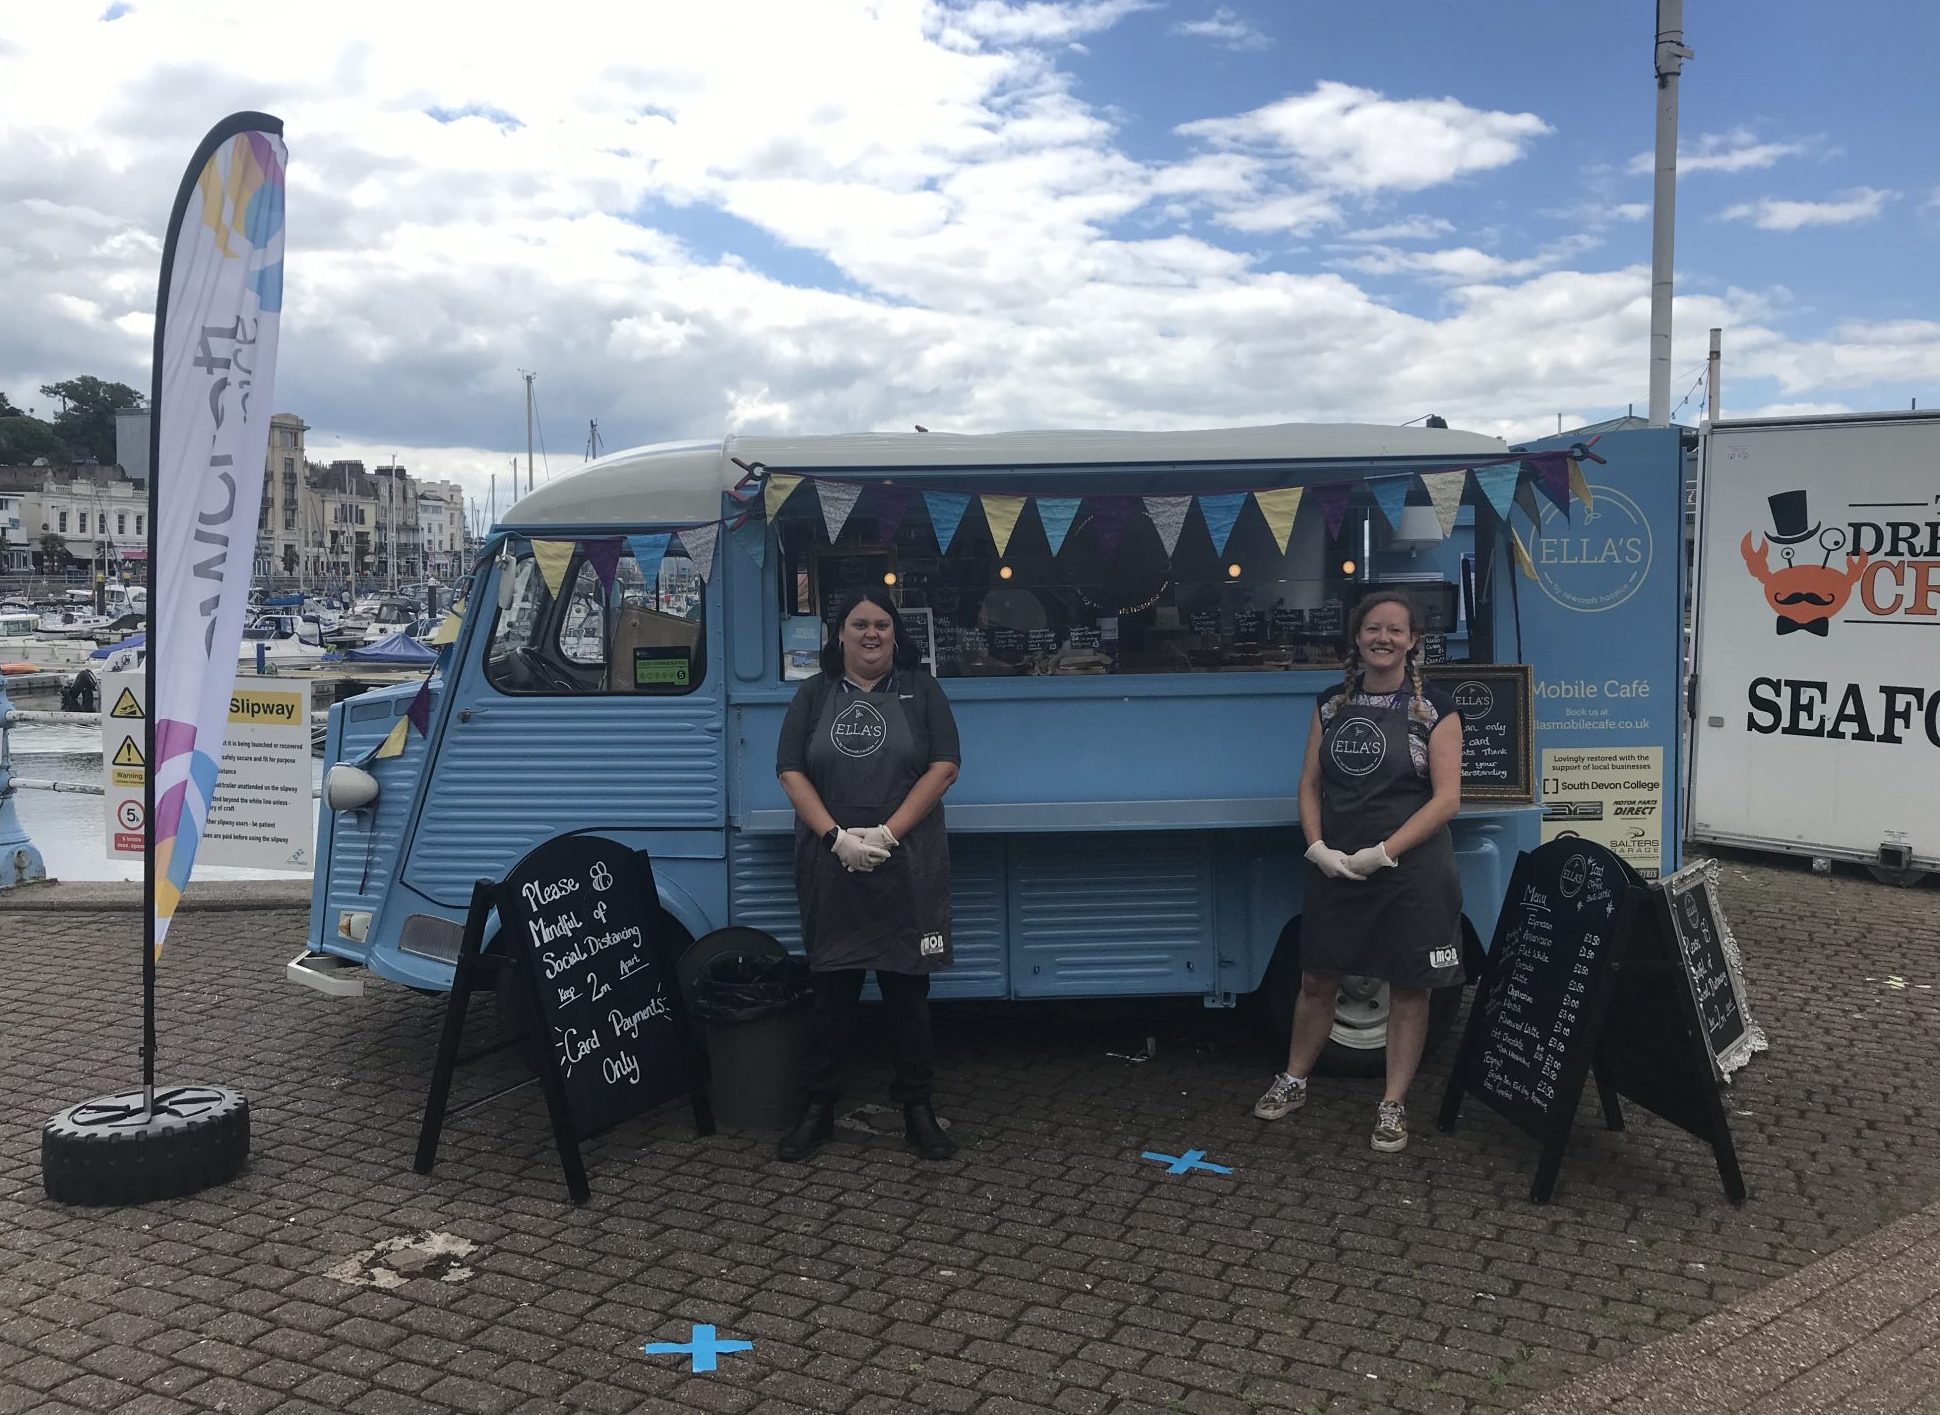 Ella's mobile cafe van and the staff members pose on the harbour.